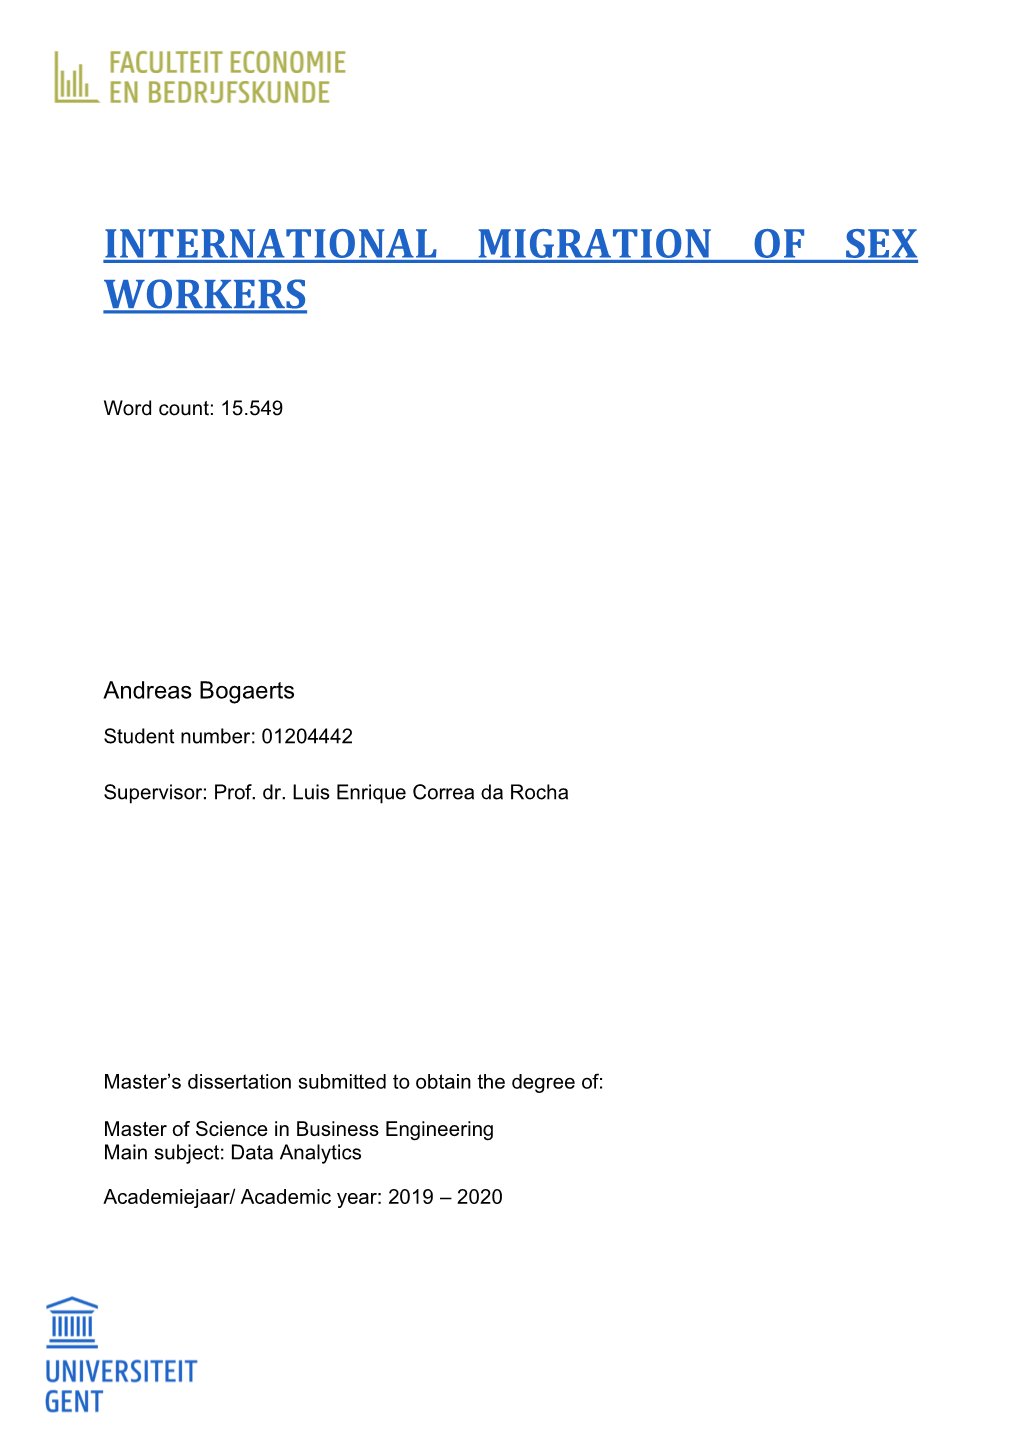 International Migration of Sex Workers